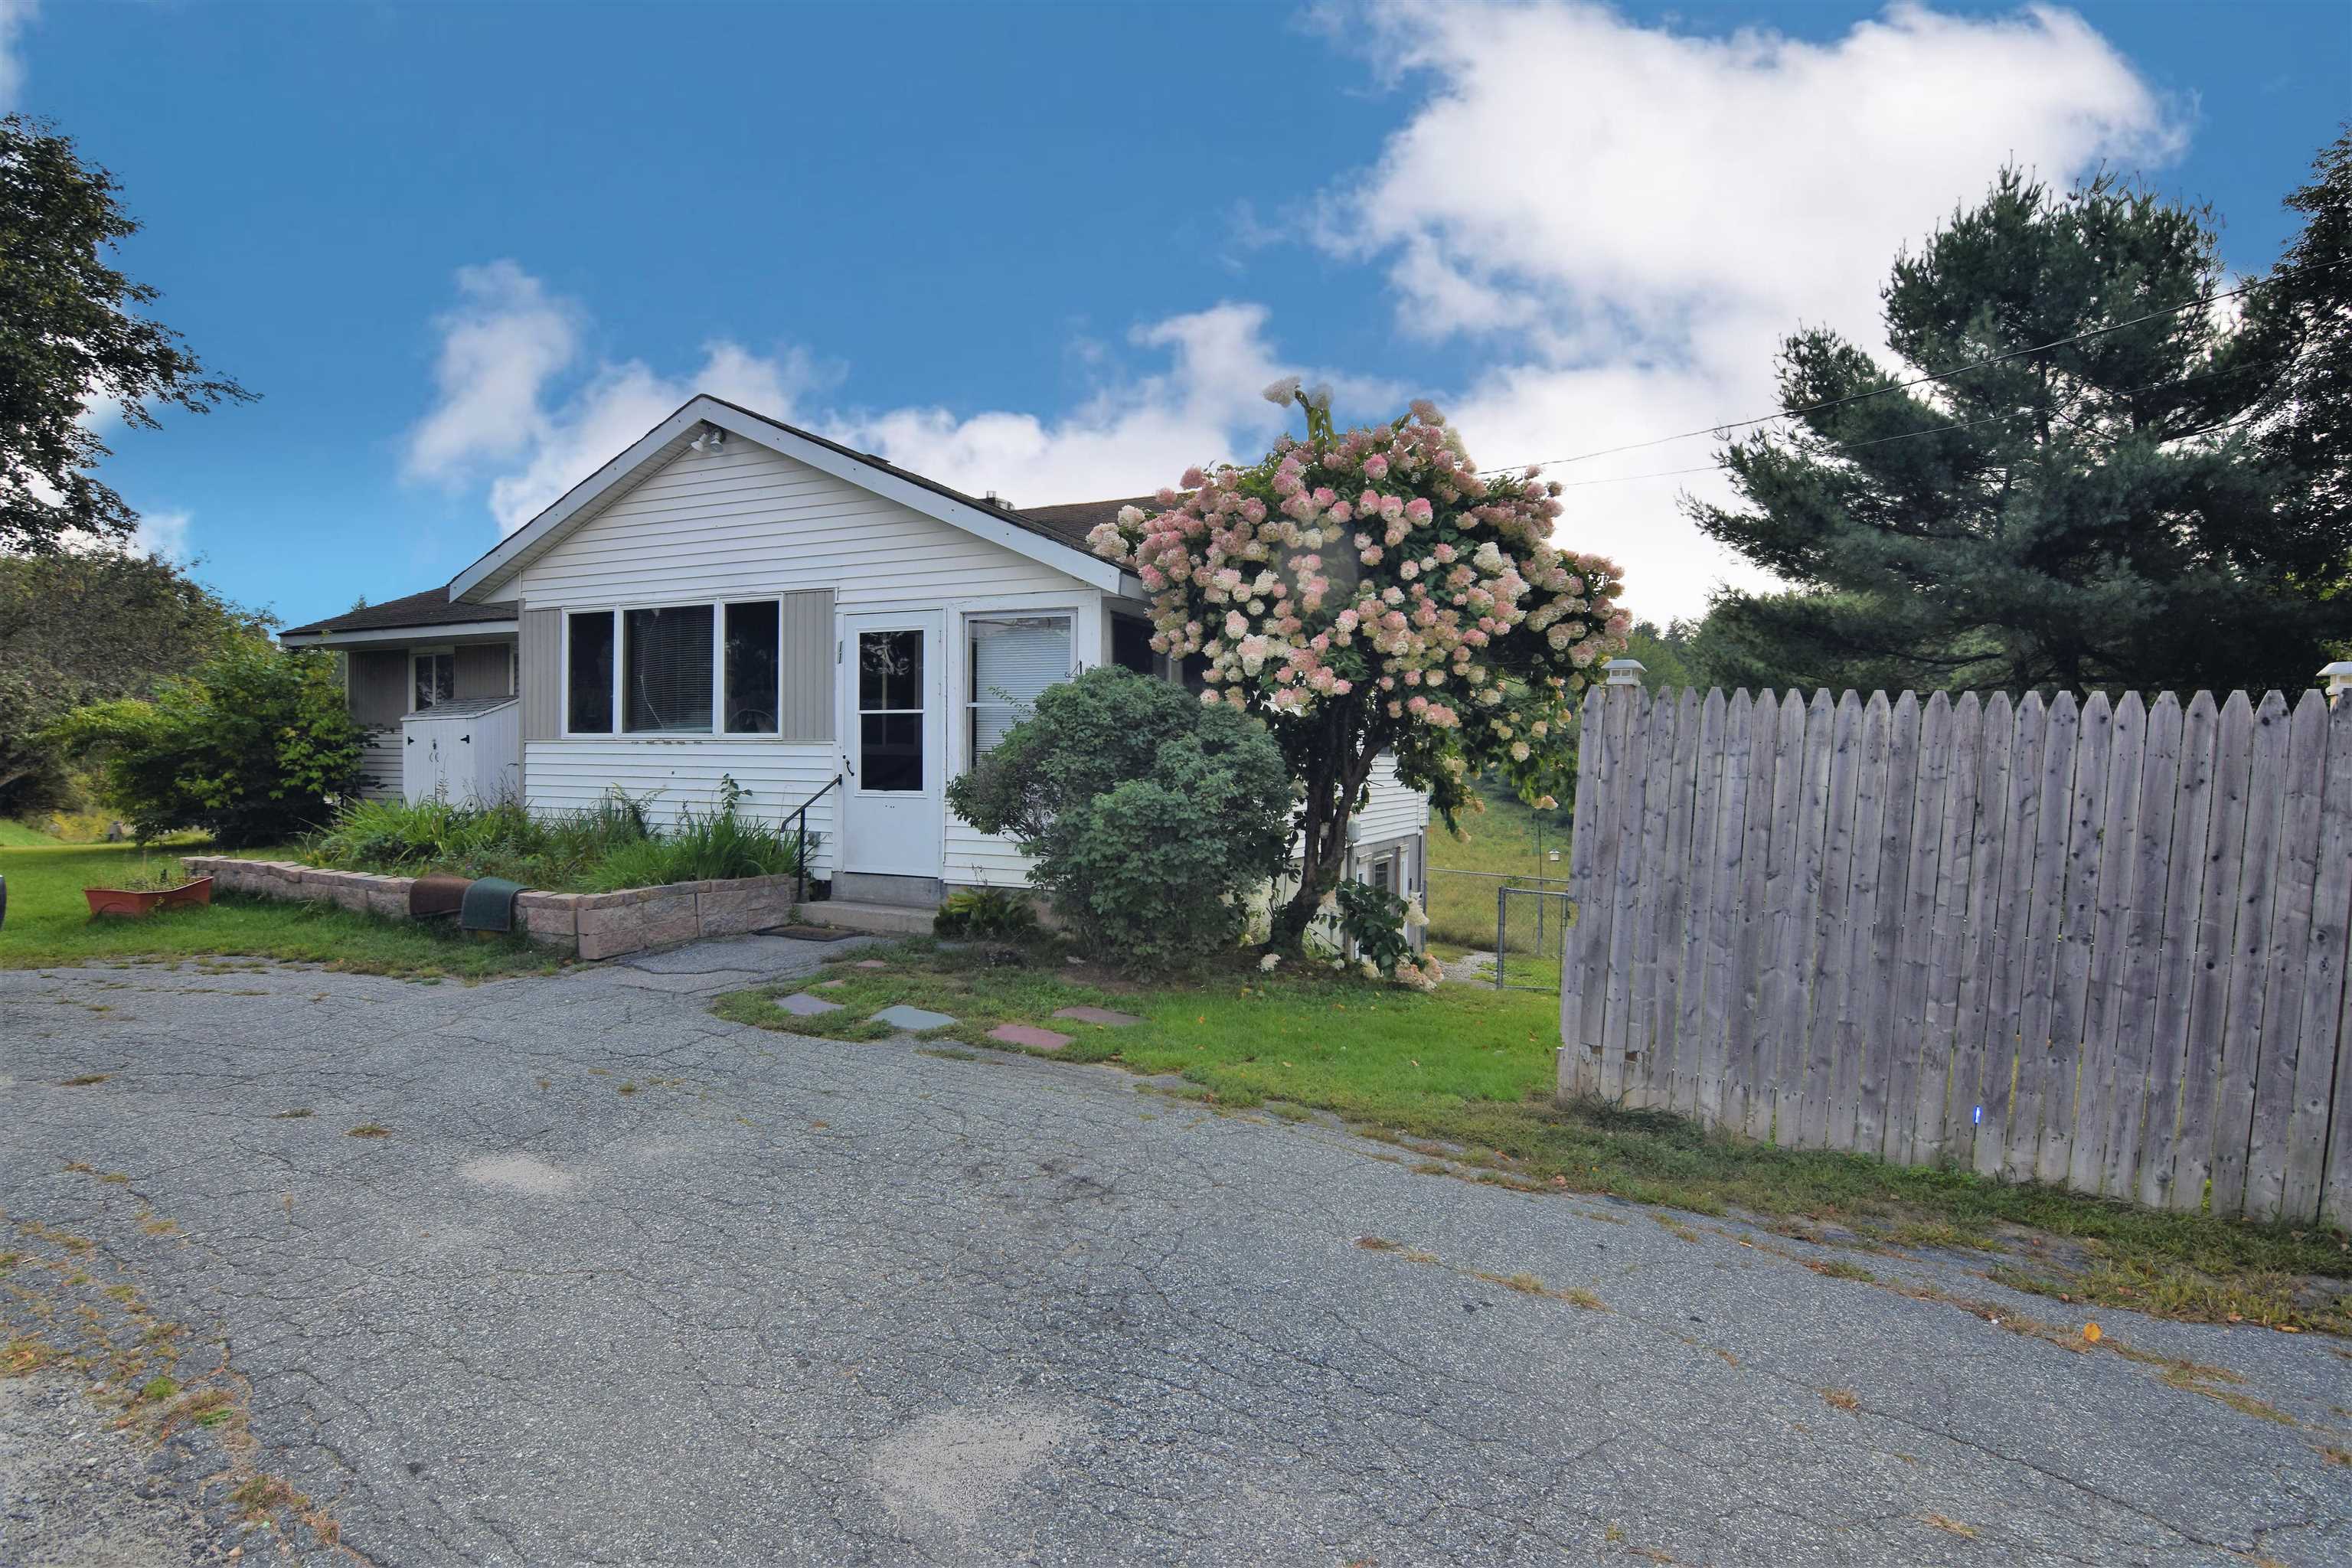 Newport NH 03773 Home for sale $List Price is $290,000